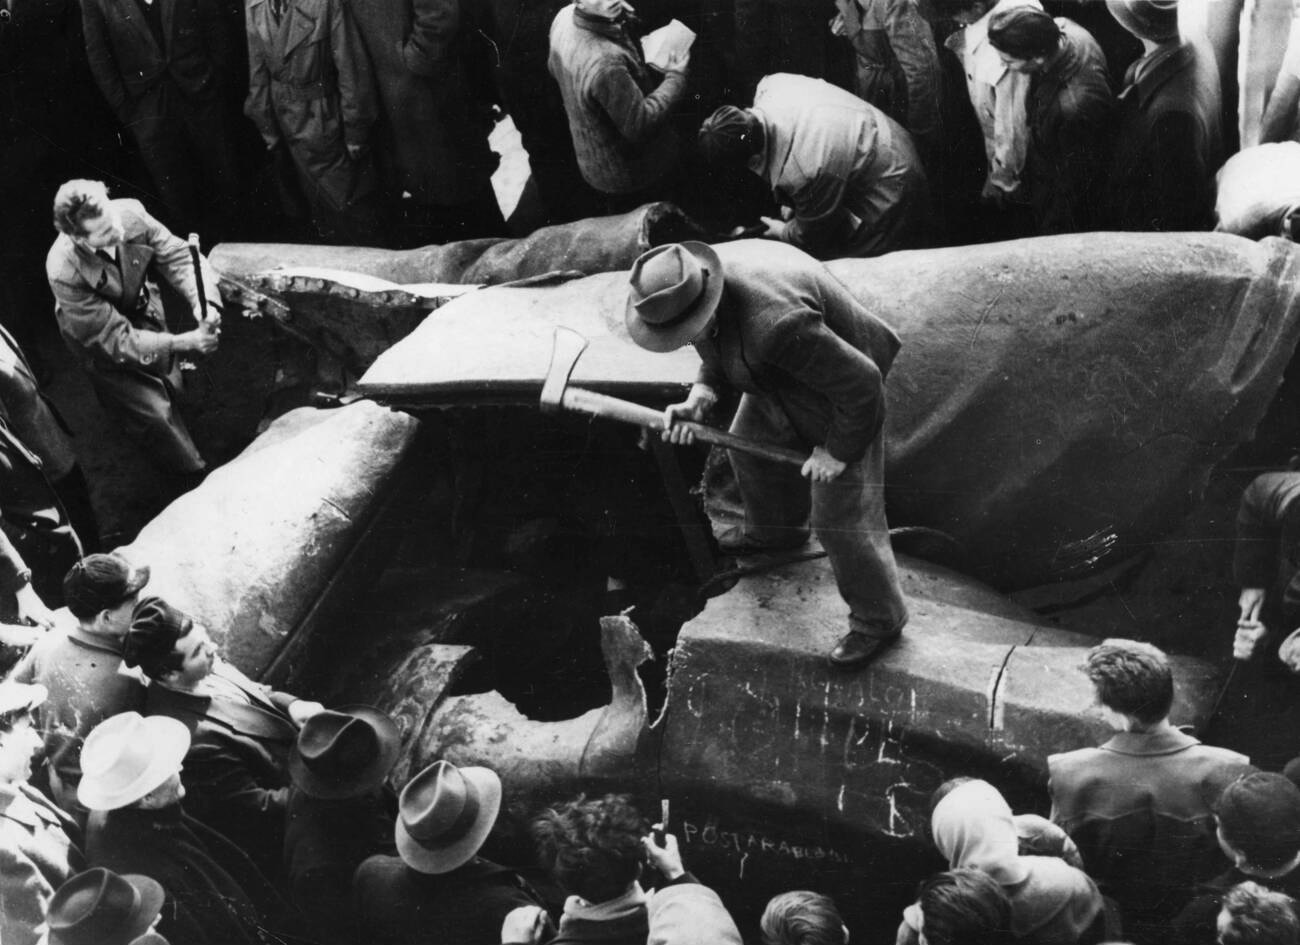 November 3, 1956: the statue of Stalin is destroyed near the National Theatre in Budapest.